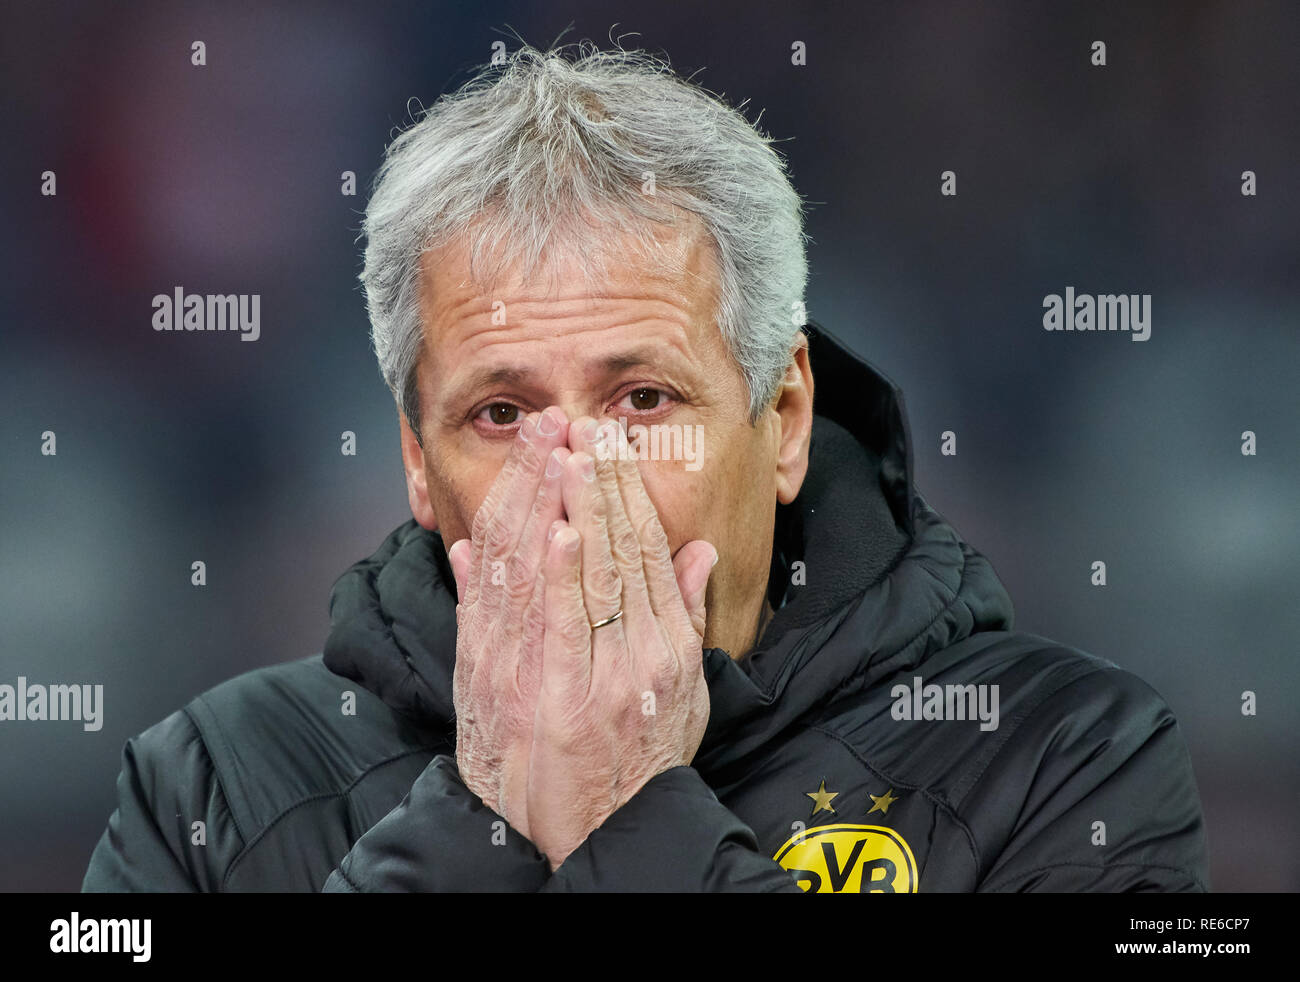 leipzig-germany-19th-jan-2019-lucien-favre-chef-trainer-bvb-half-size-portrait-sad-disappointed-angry-emotions-disappointment-frustration-frustrated-sadness-desperate-despair-rb-leipzig-borussia-dortmund-dfl-regulations-prohibit-any-use-of-photographs-as-image-sequences-andor-quasi-video-1german-soccer-league-leipzig-germany-january-19-2019-season-20182019-matchday-18-bvb-red-bull-peter-schatz-alamy-live-news-RE6CP7.jpg